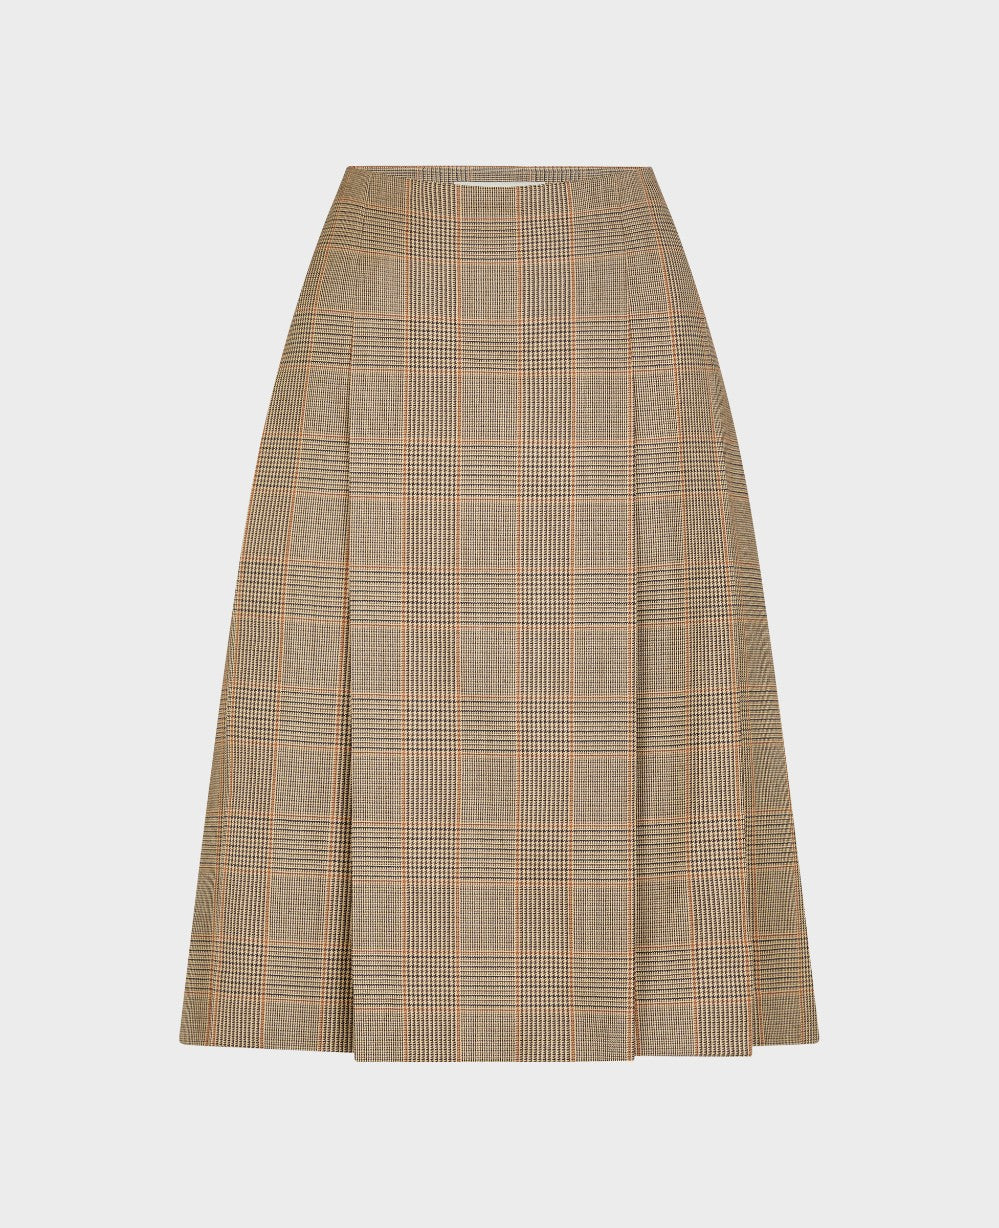 Made from a luxury Wool and Scottish Tweed blend, this Pleated Midi Skirt adds instant sophistication to any look. A staple for Autumn, pair this skirt with our Really Wild Organic Logo Cotton T-Shirts to create a stylish, yet casual look.